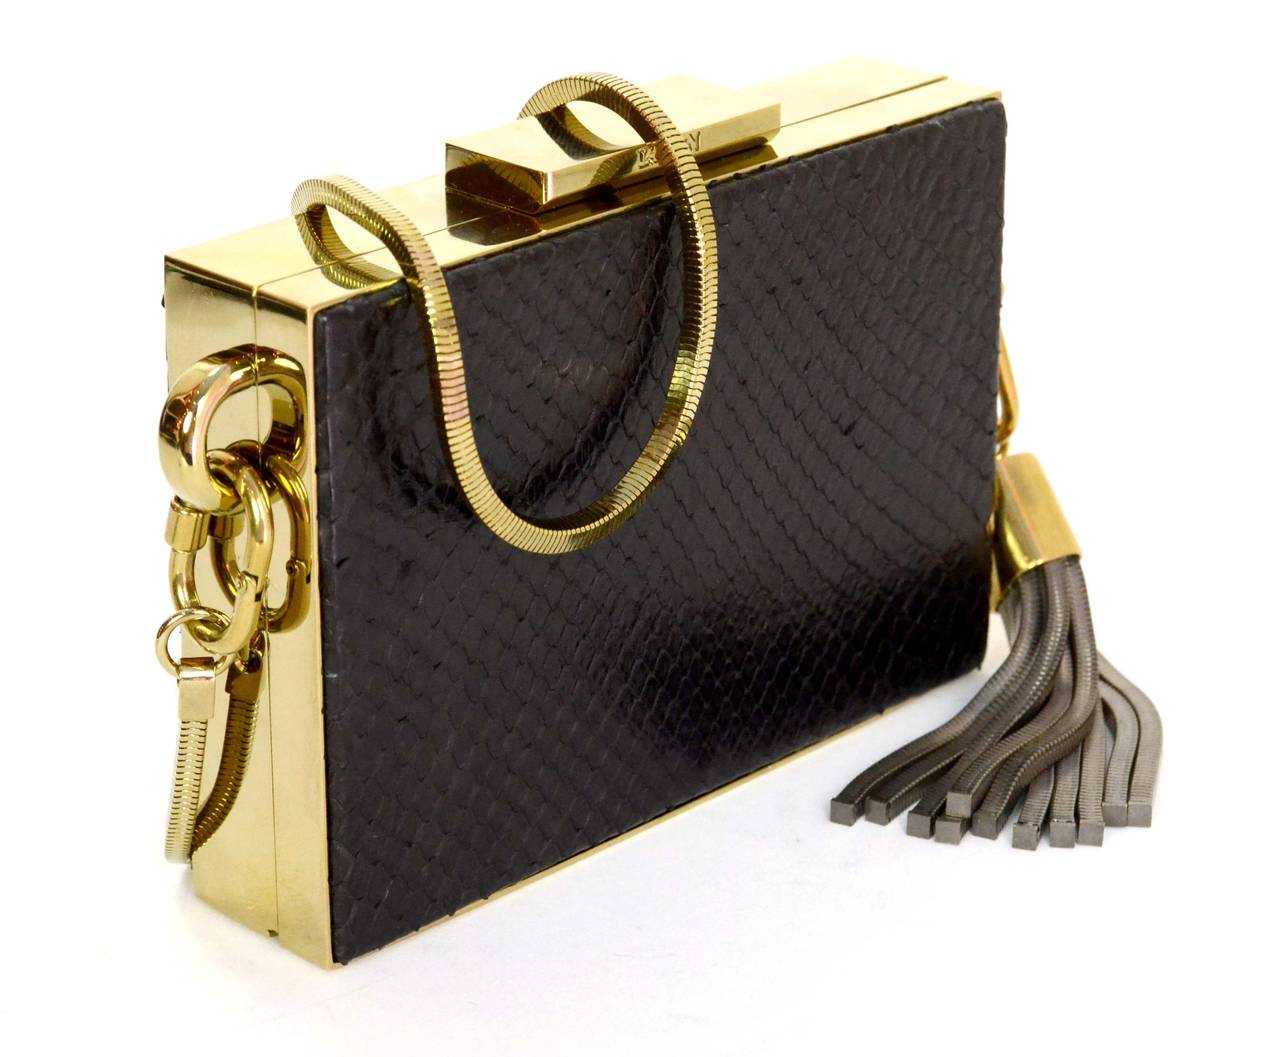 Lanvin Black Python Minaudiere Evening Bag
Features Lanvin tassel charm with hanging chain links and removable gold chain strap

    Made in: Italy
    Color: Black and goldtone
    Hardware: Goldtone
    Materials: Python skin, suede, and